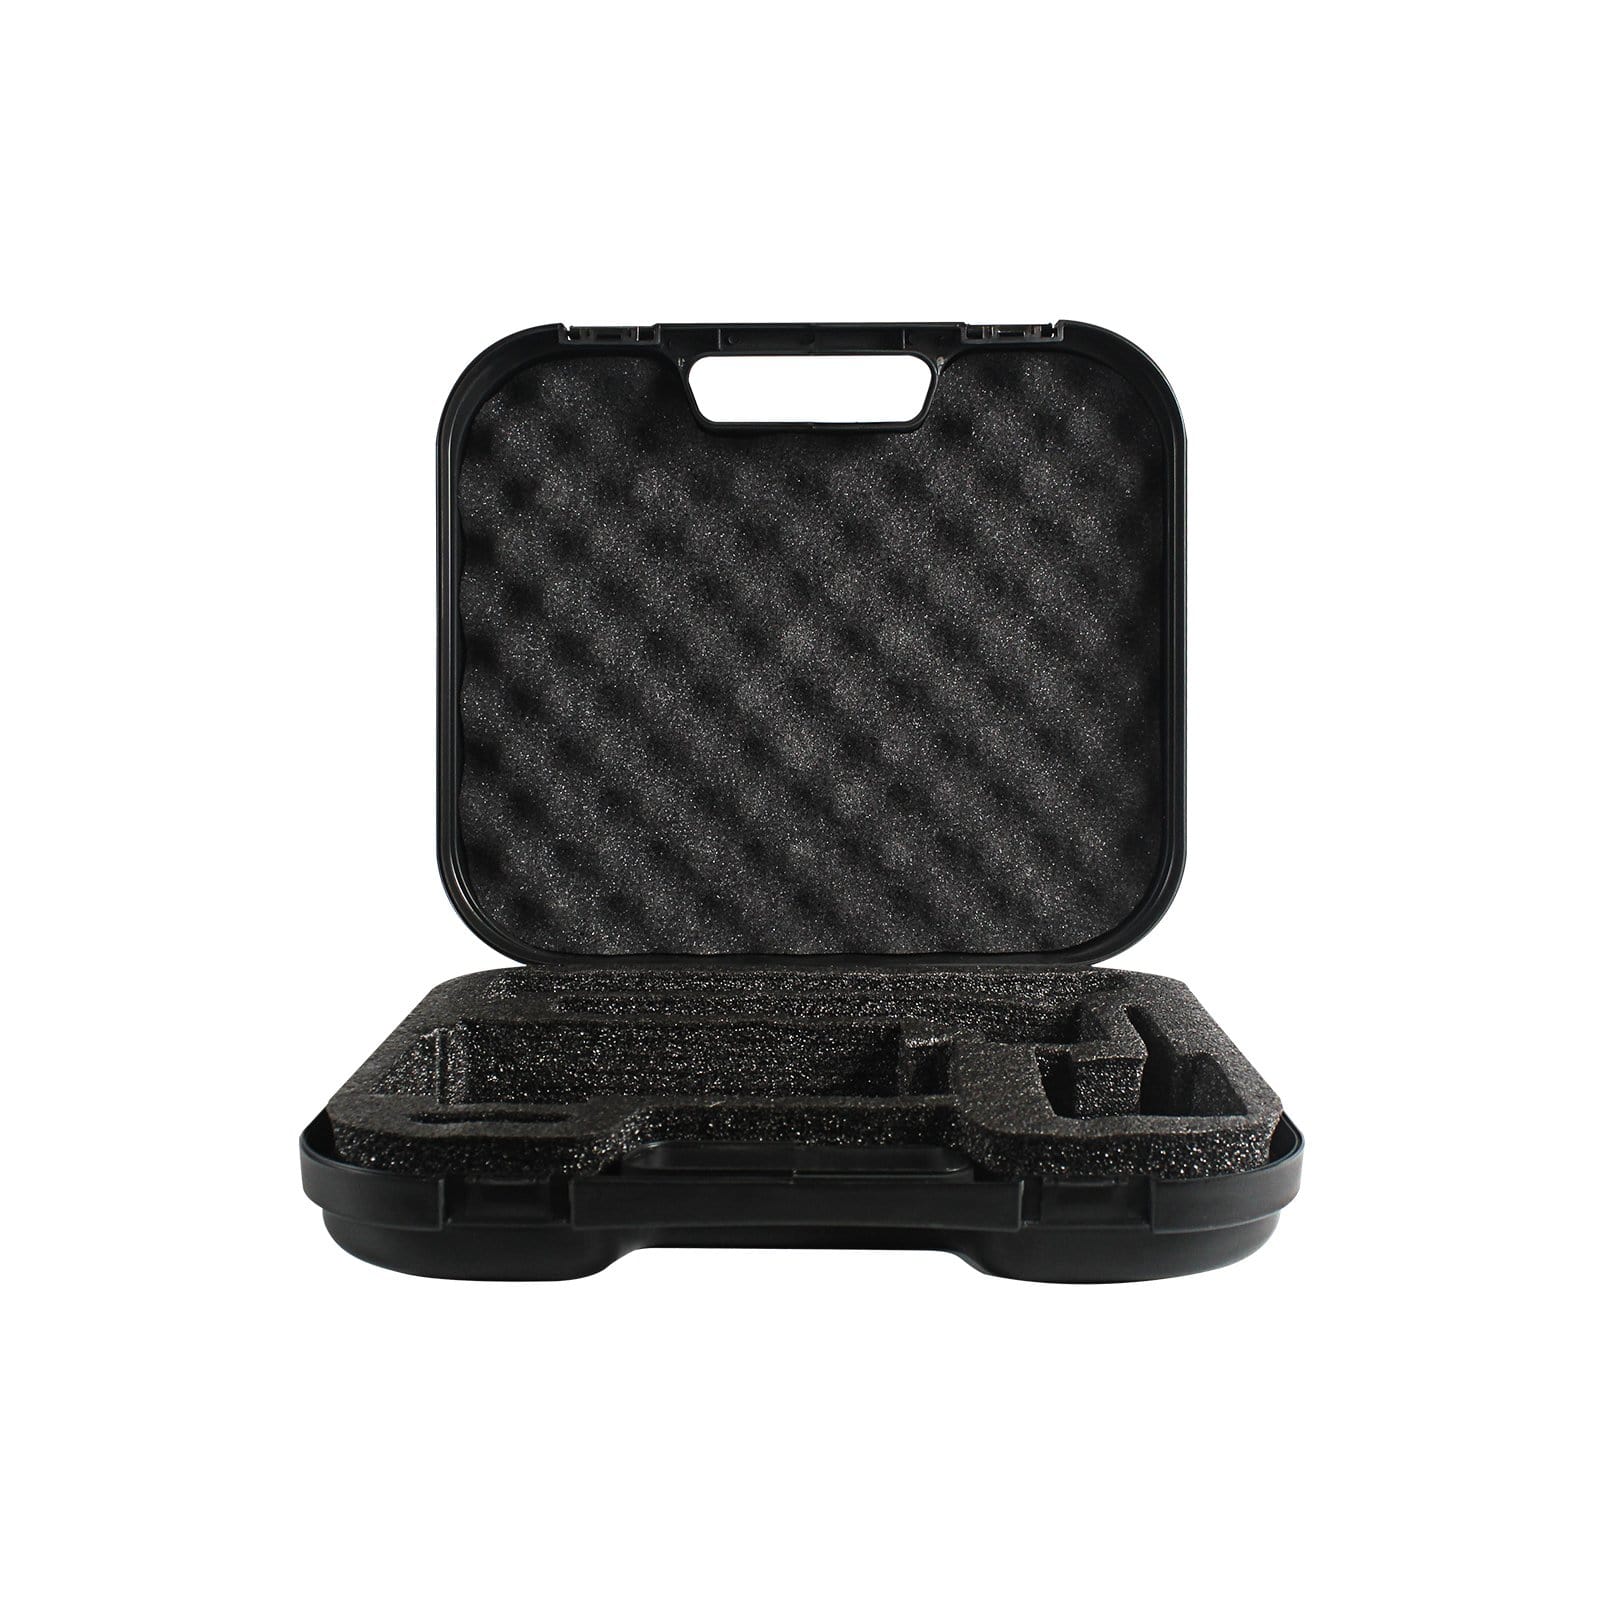 Phenyx Pro Black Hardshell Carrying Case with Form Inserts for PTM-10/11 and PTU-52 Systems